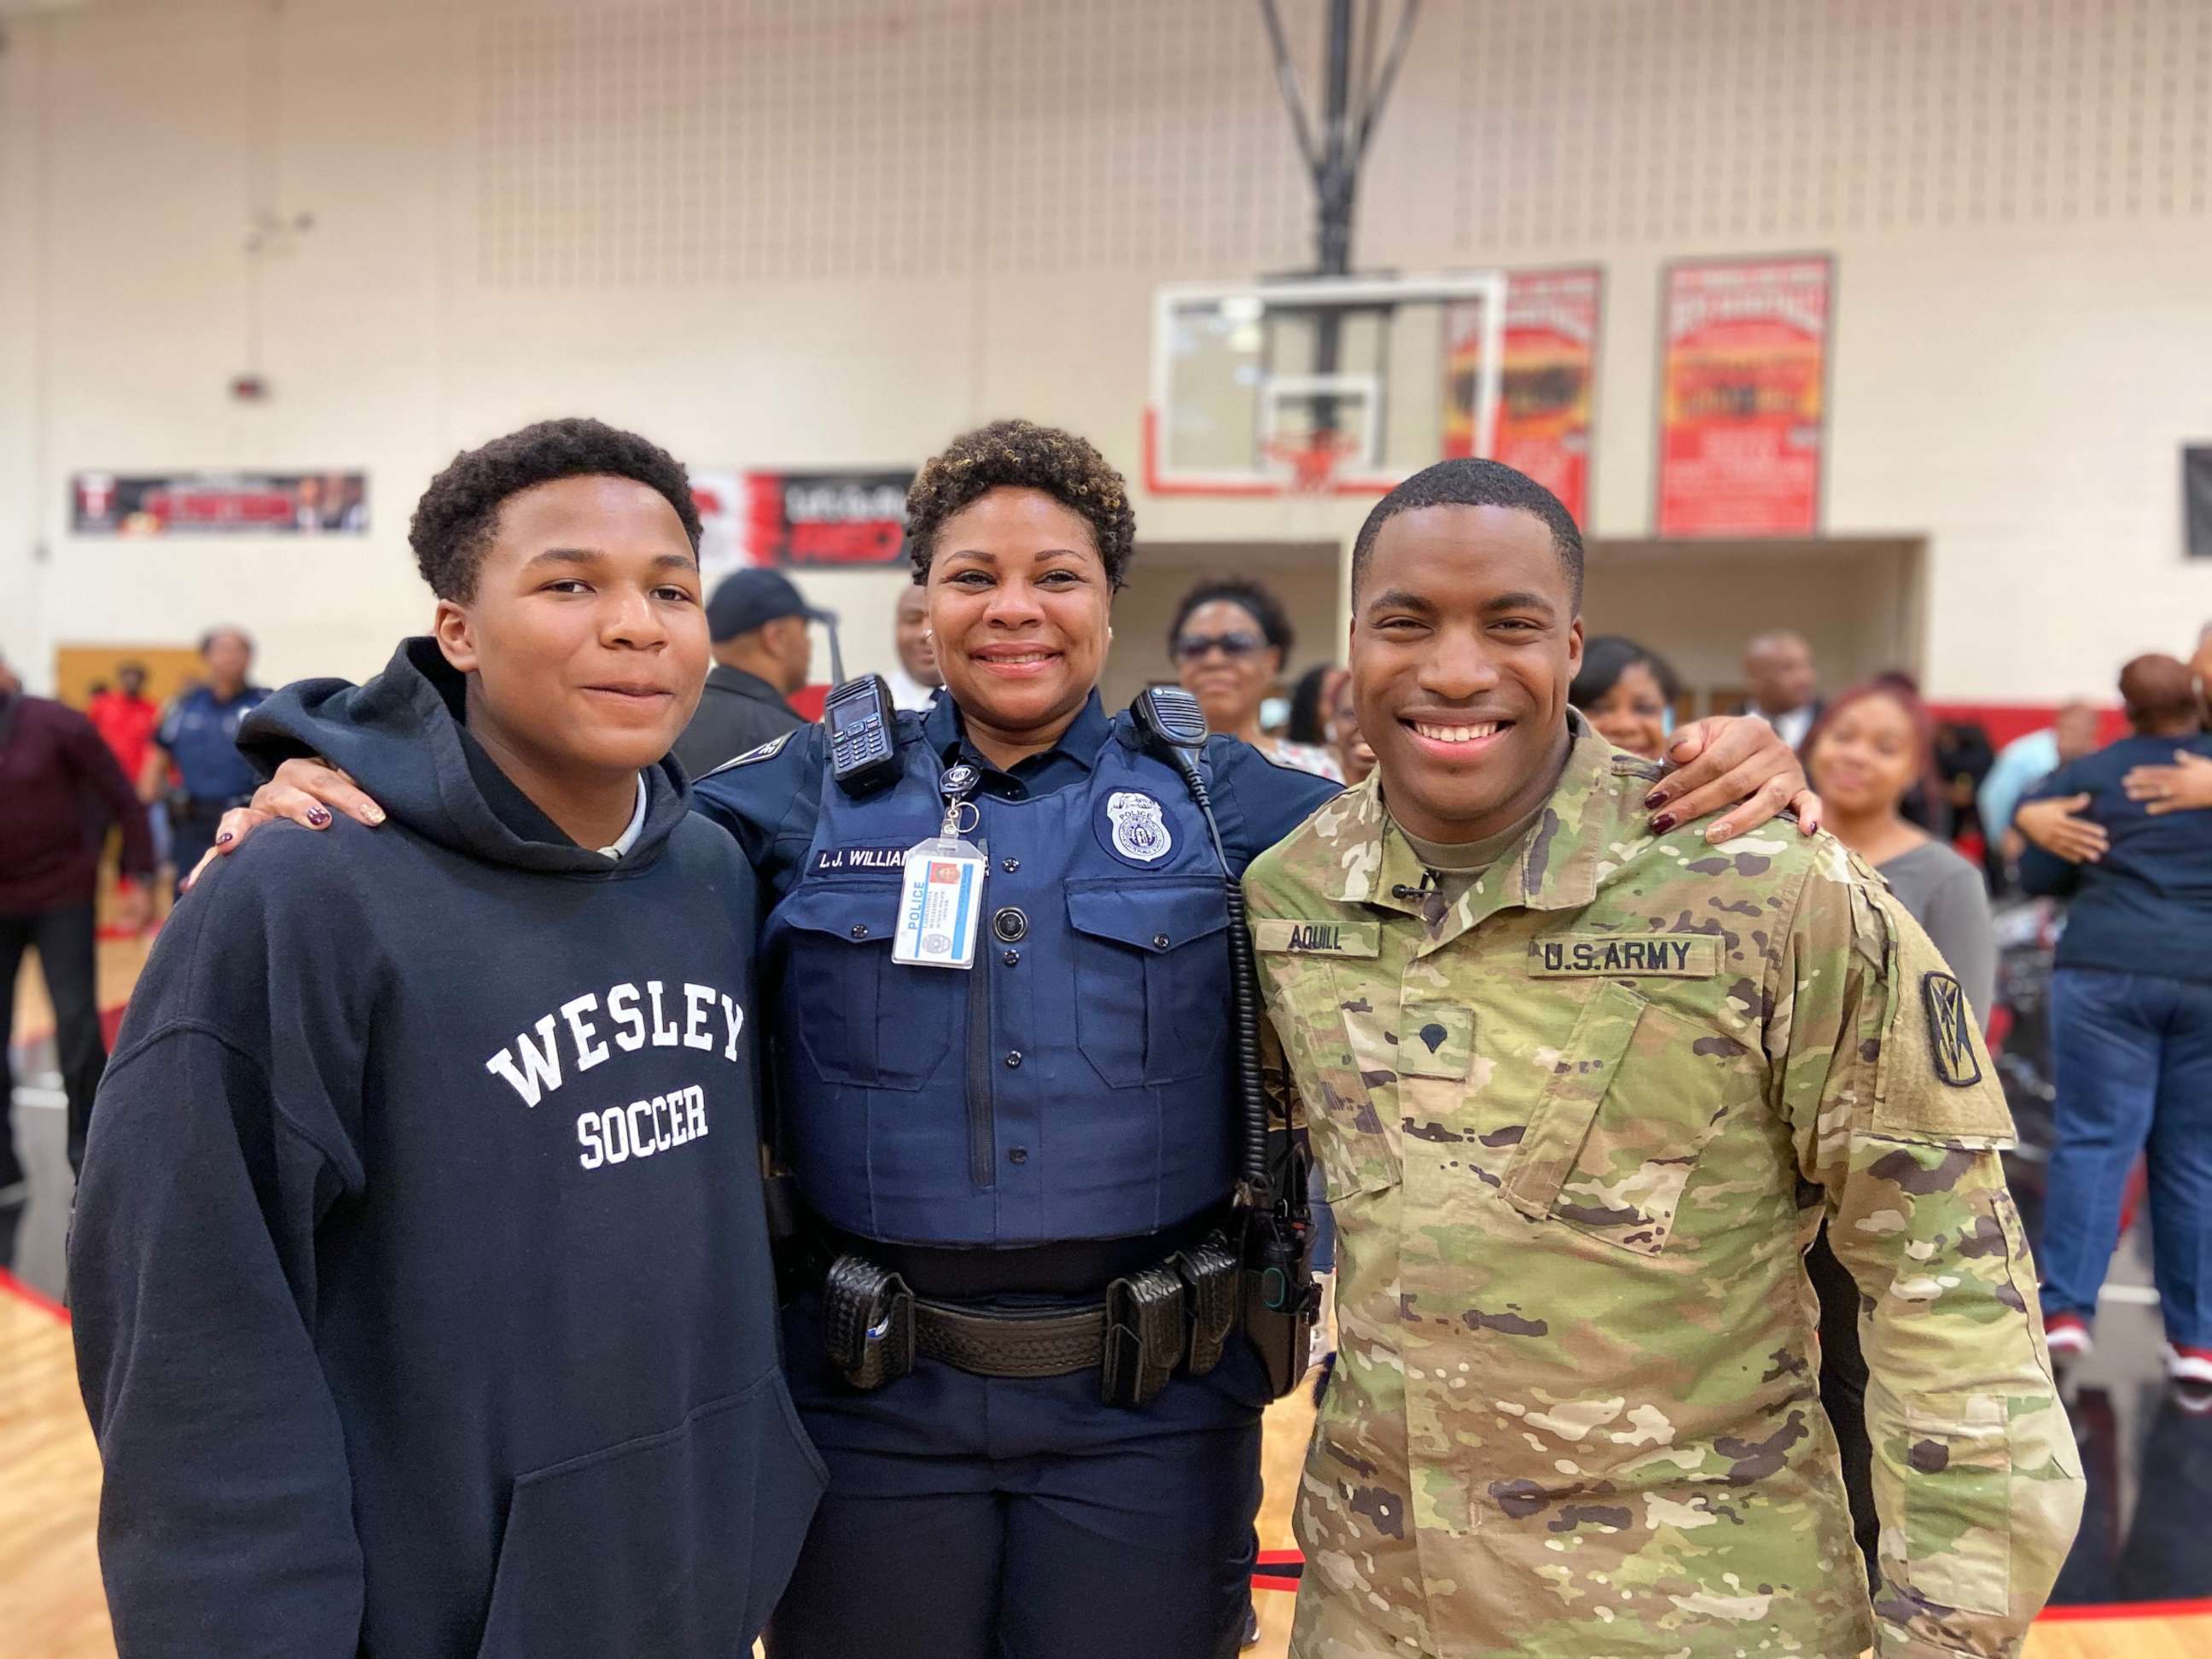 PHOTO: Officer Williamson, center, poses with her sons Justin Patillo, left, and Shakir Aquil